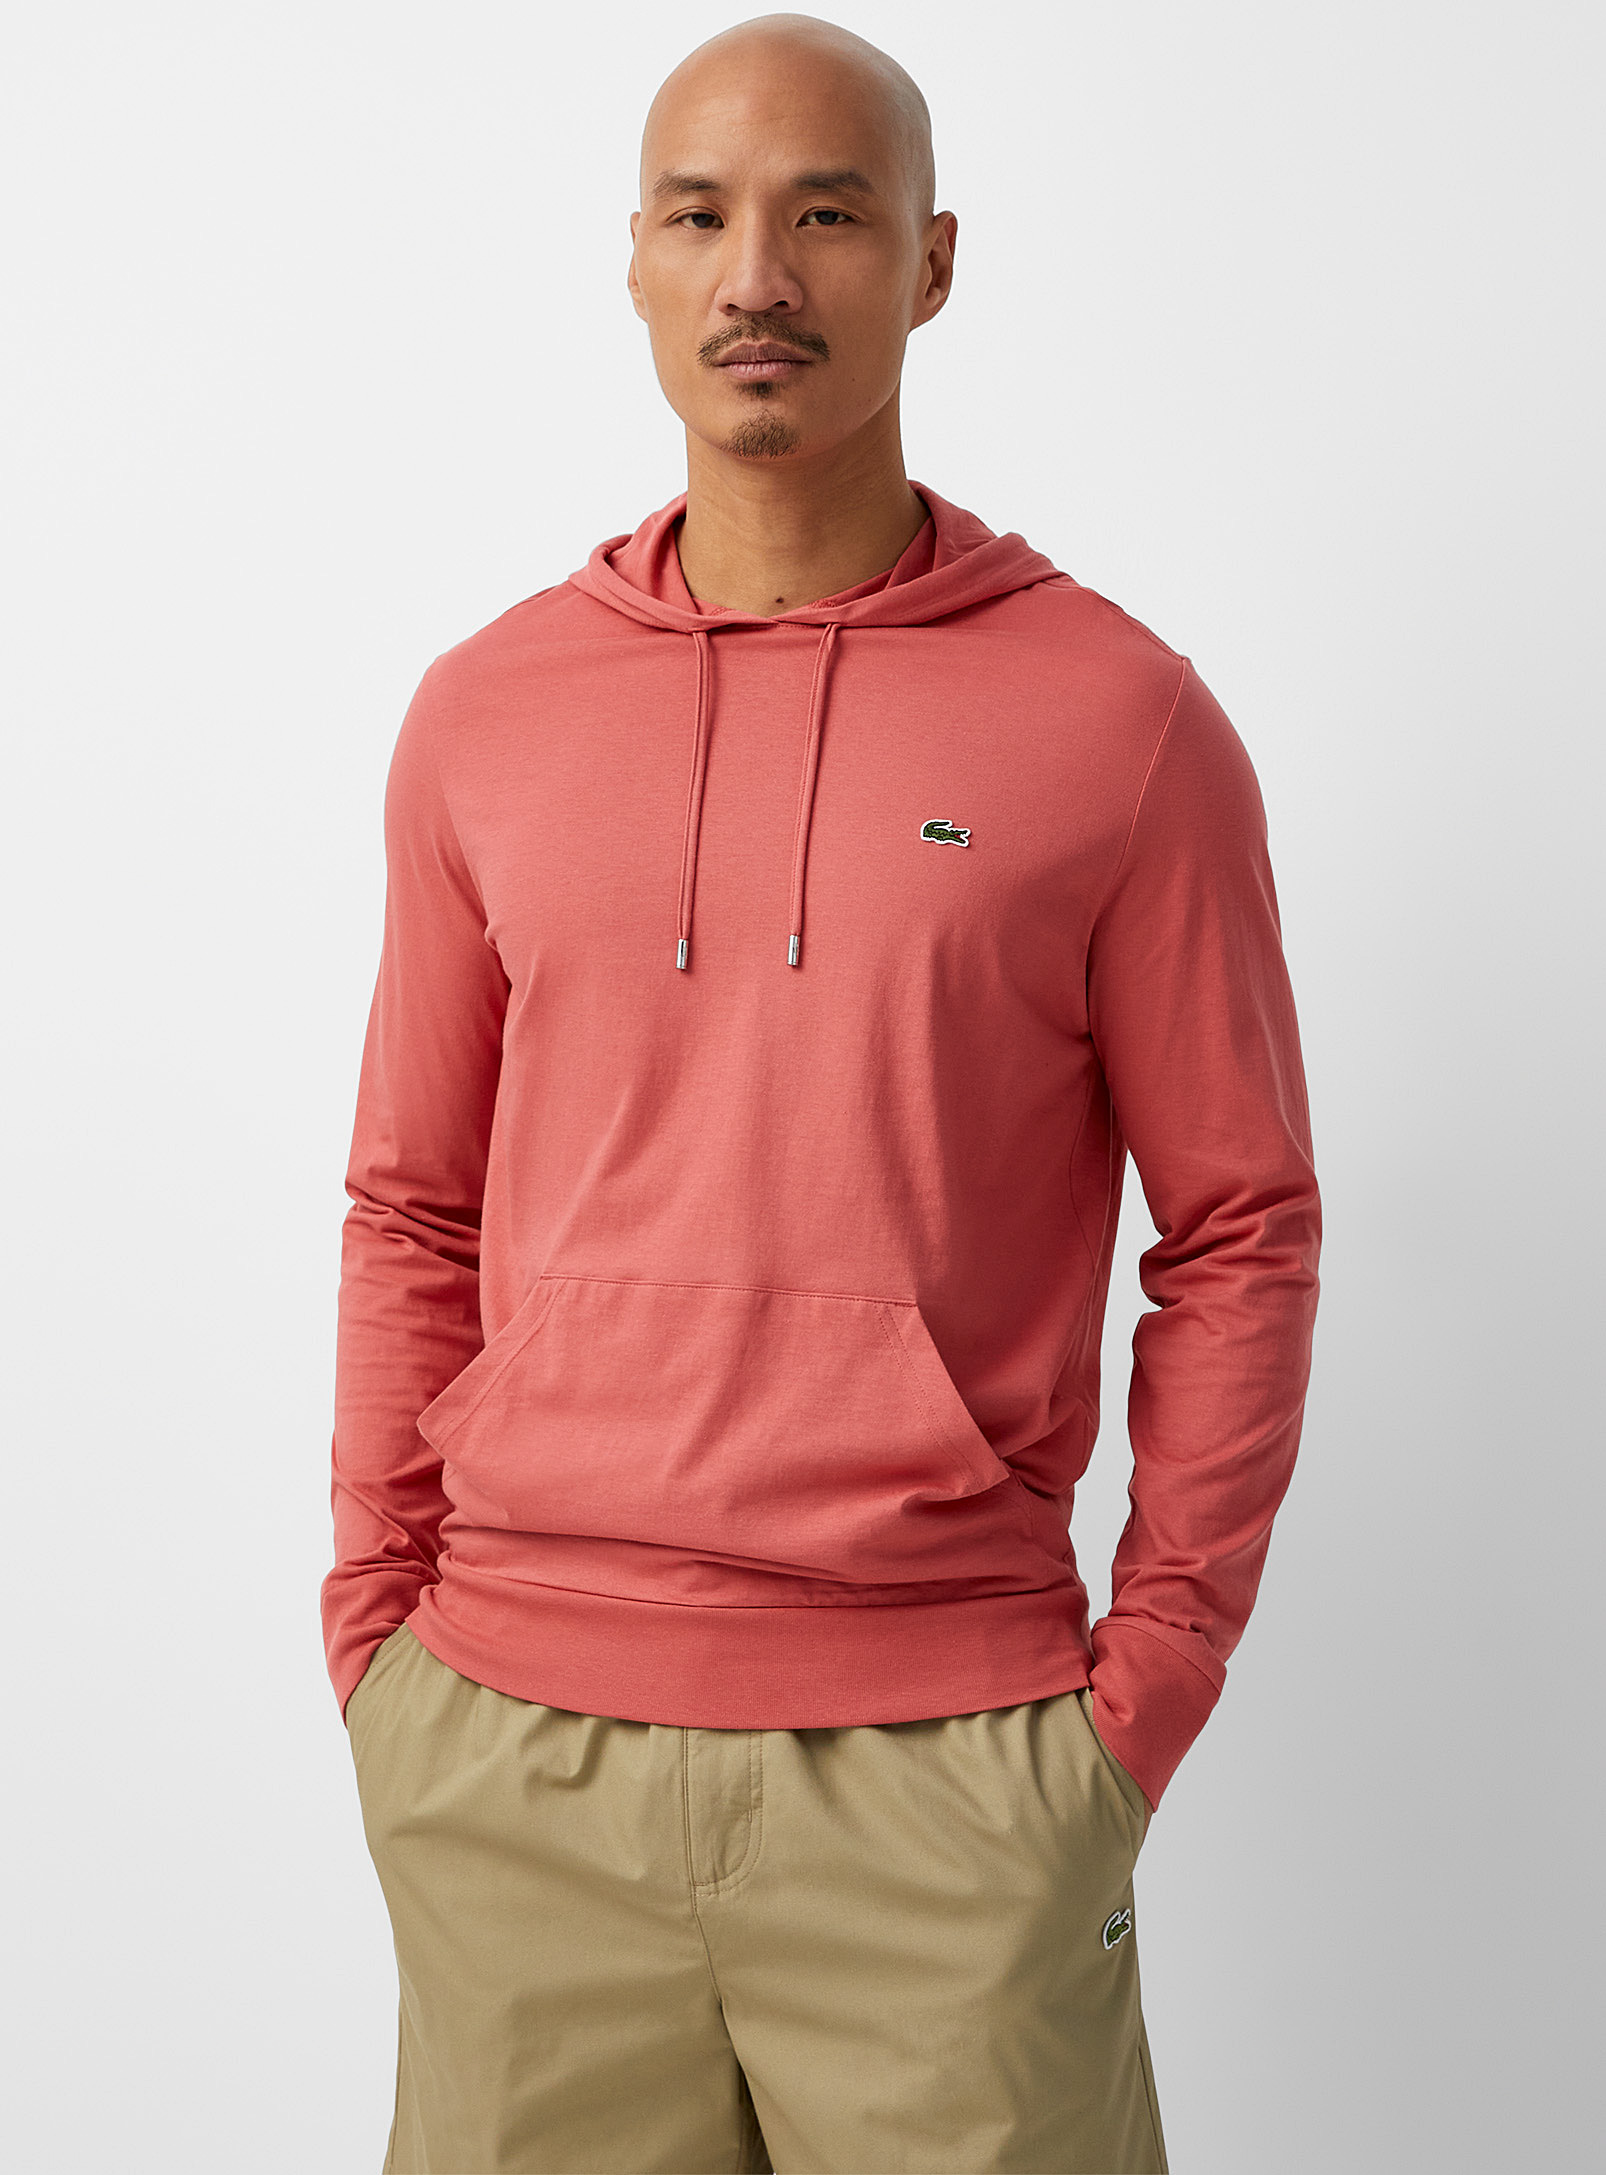 Lacoste Crocodile Emblem Jersey Hoodie In Cherry Red